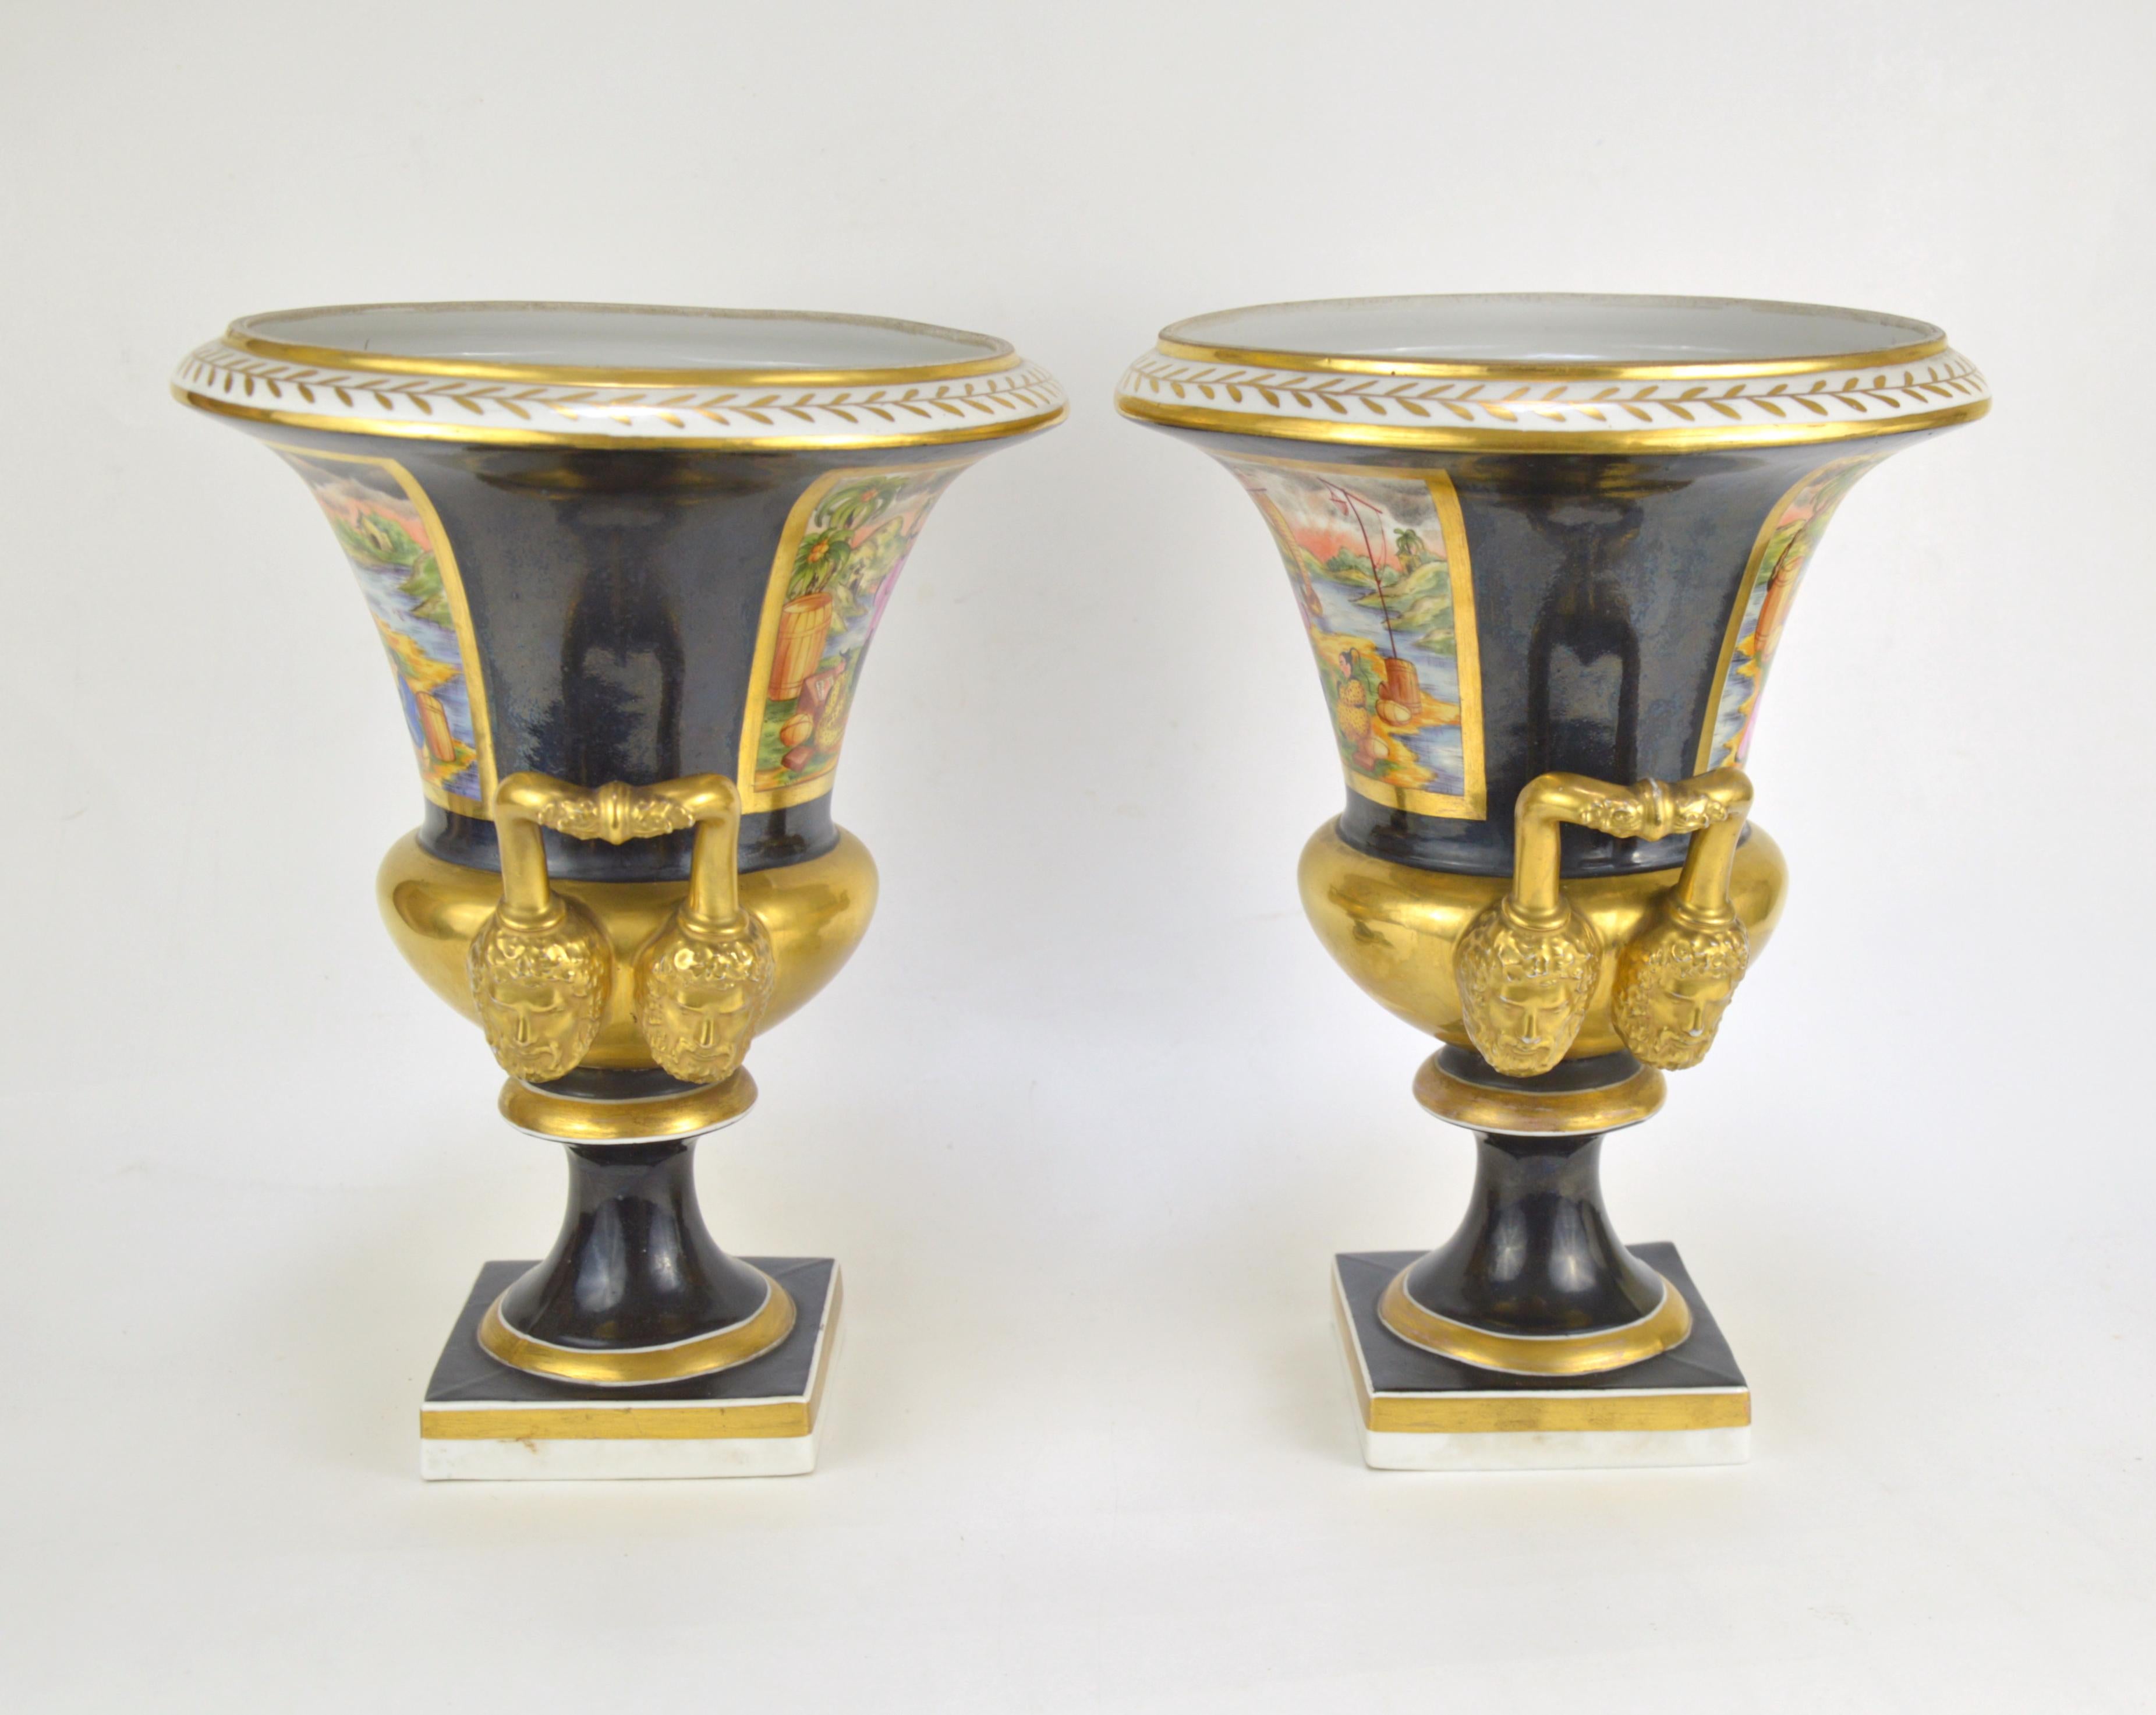 20th Century Pair of Medici Porcelain Vases Chinoiserie Style Decoration For Sale